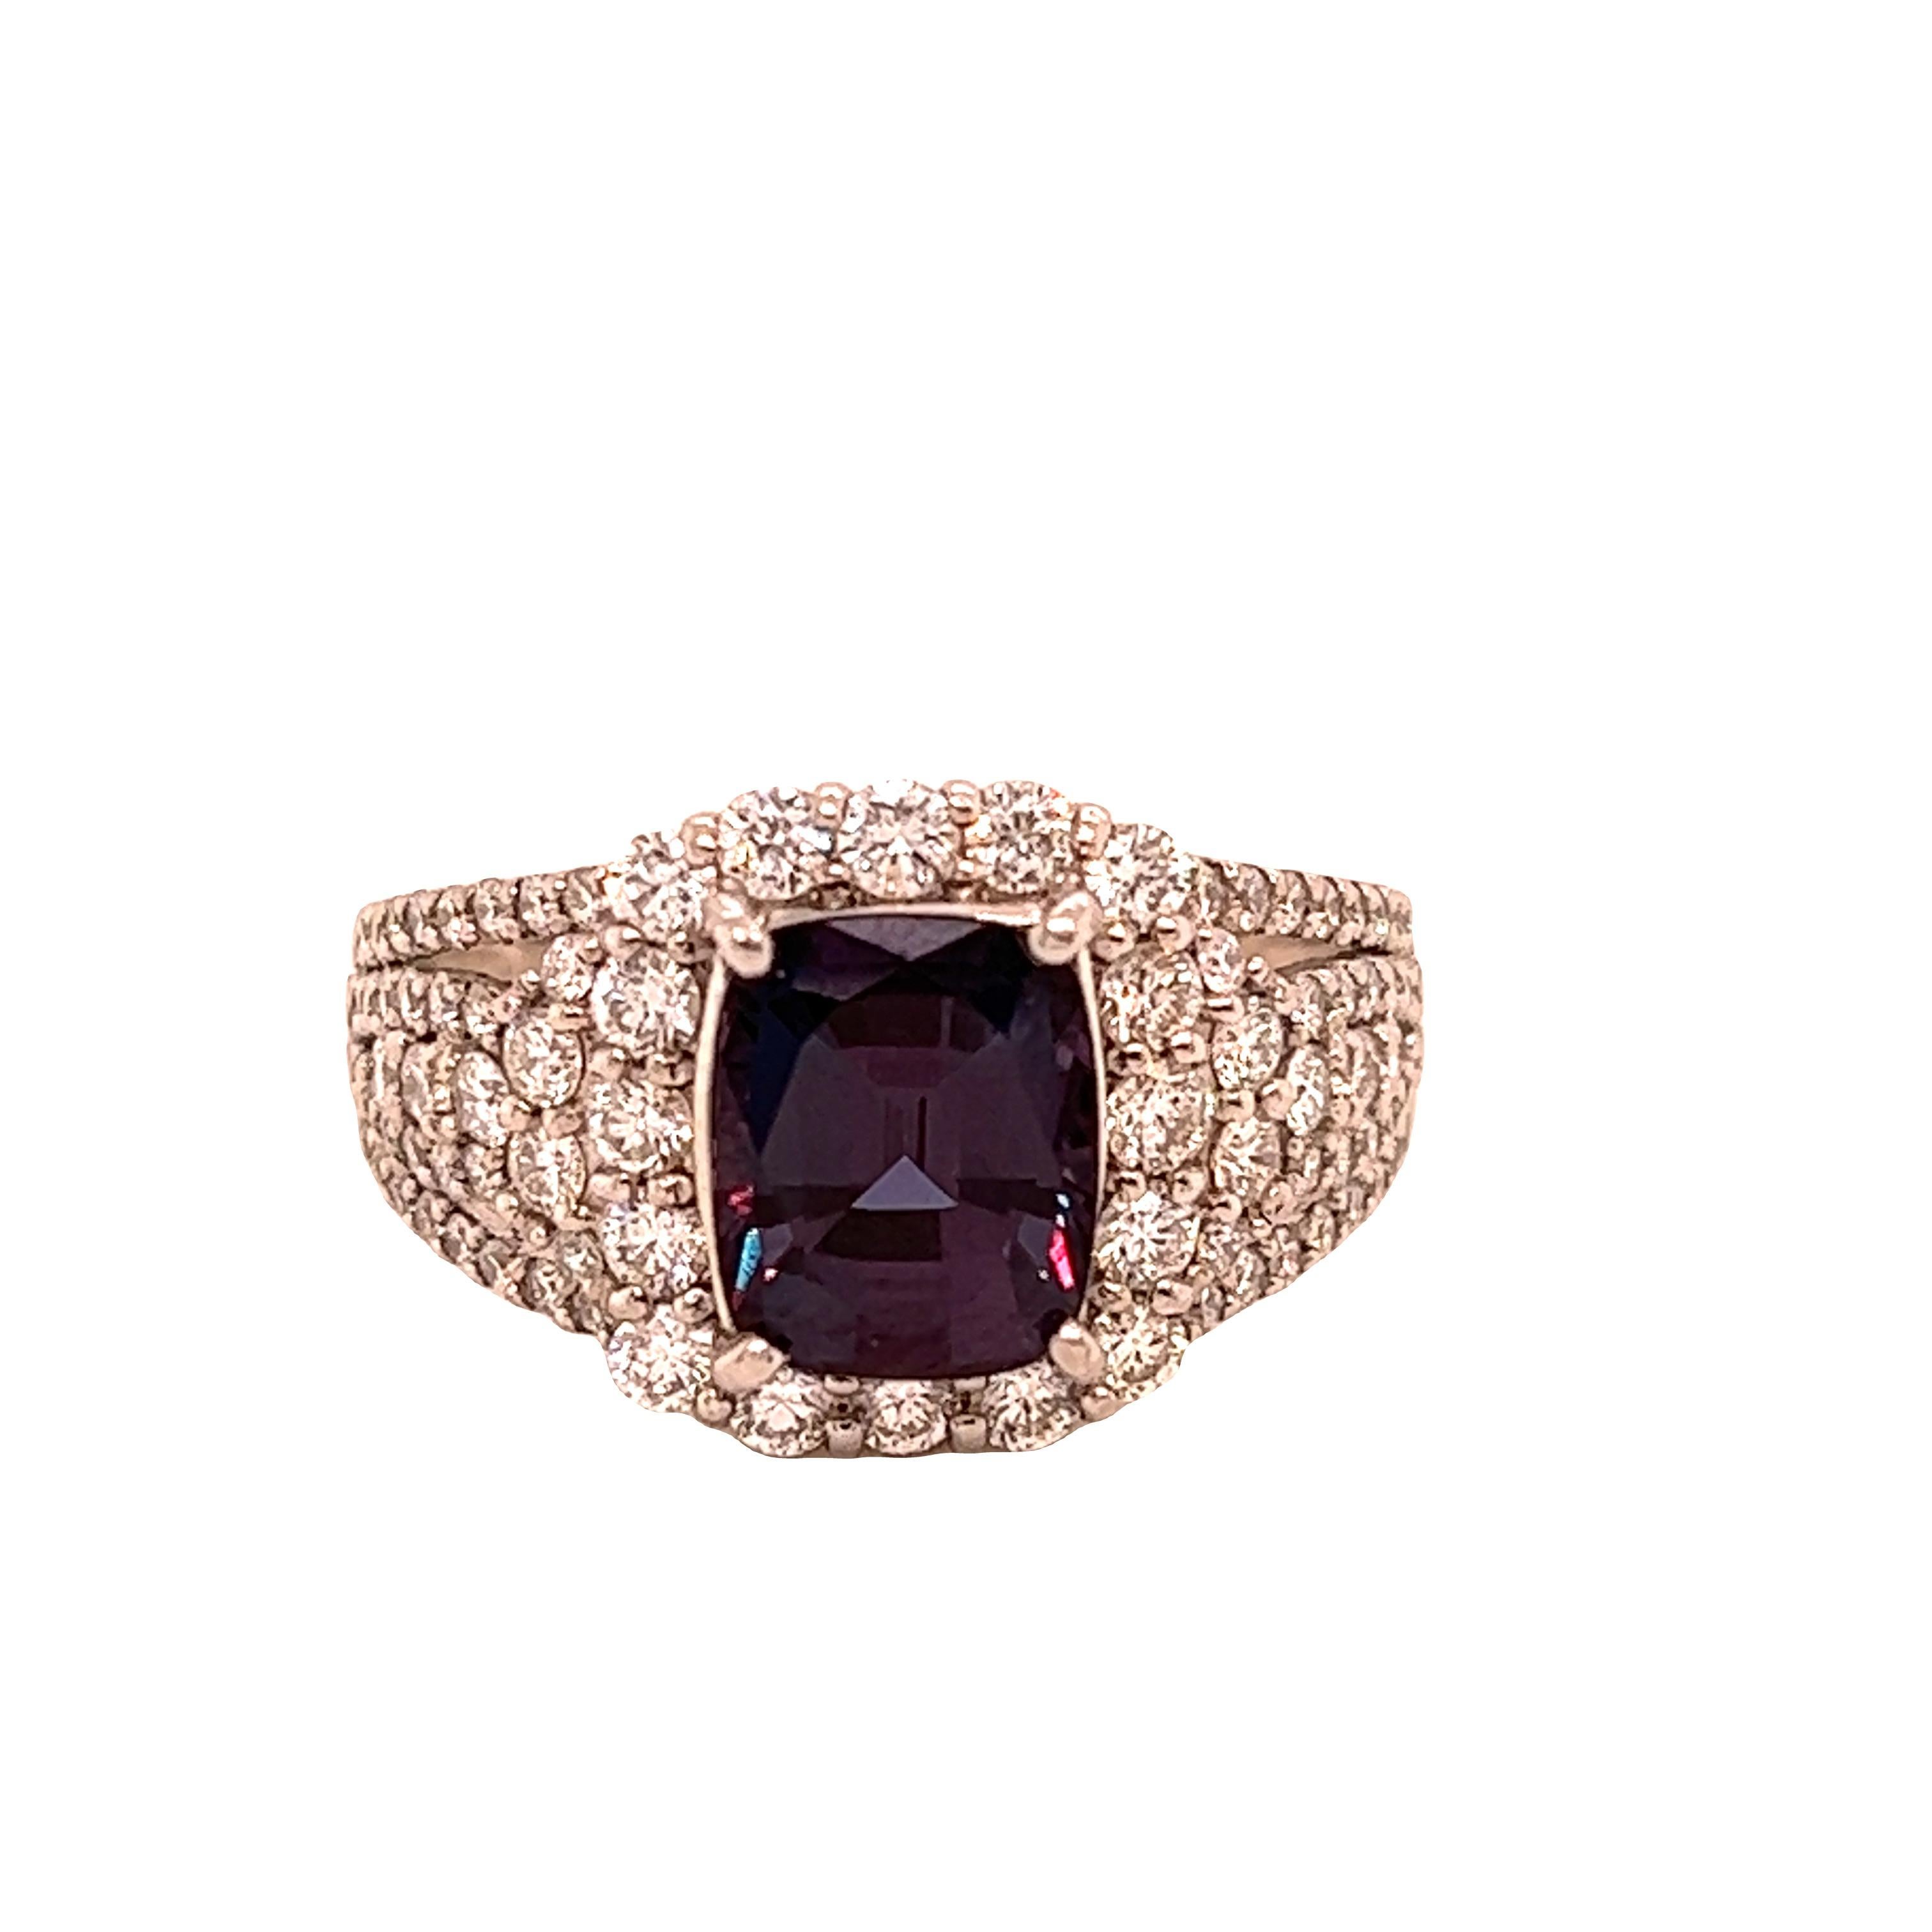 This is a gorgeous natural AAA quality cushion Alexandrite surrounded by dainty diamonds that is set in a vintage platinum setting. This ring features a natural 2.21 carat cushion alexandrite that is certified by the Gemological Institute of America